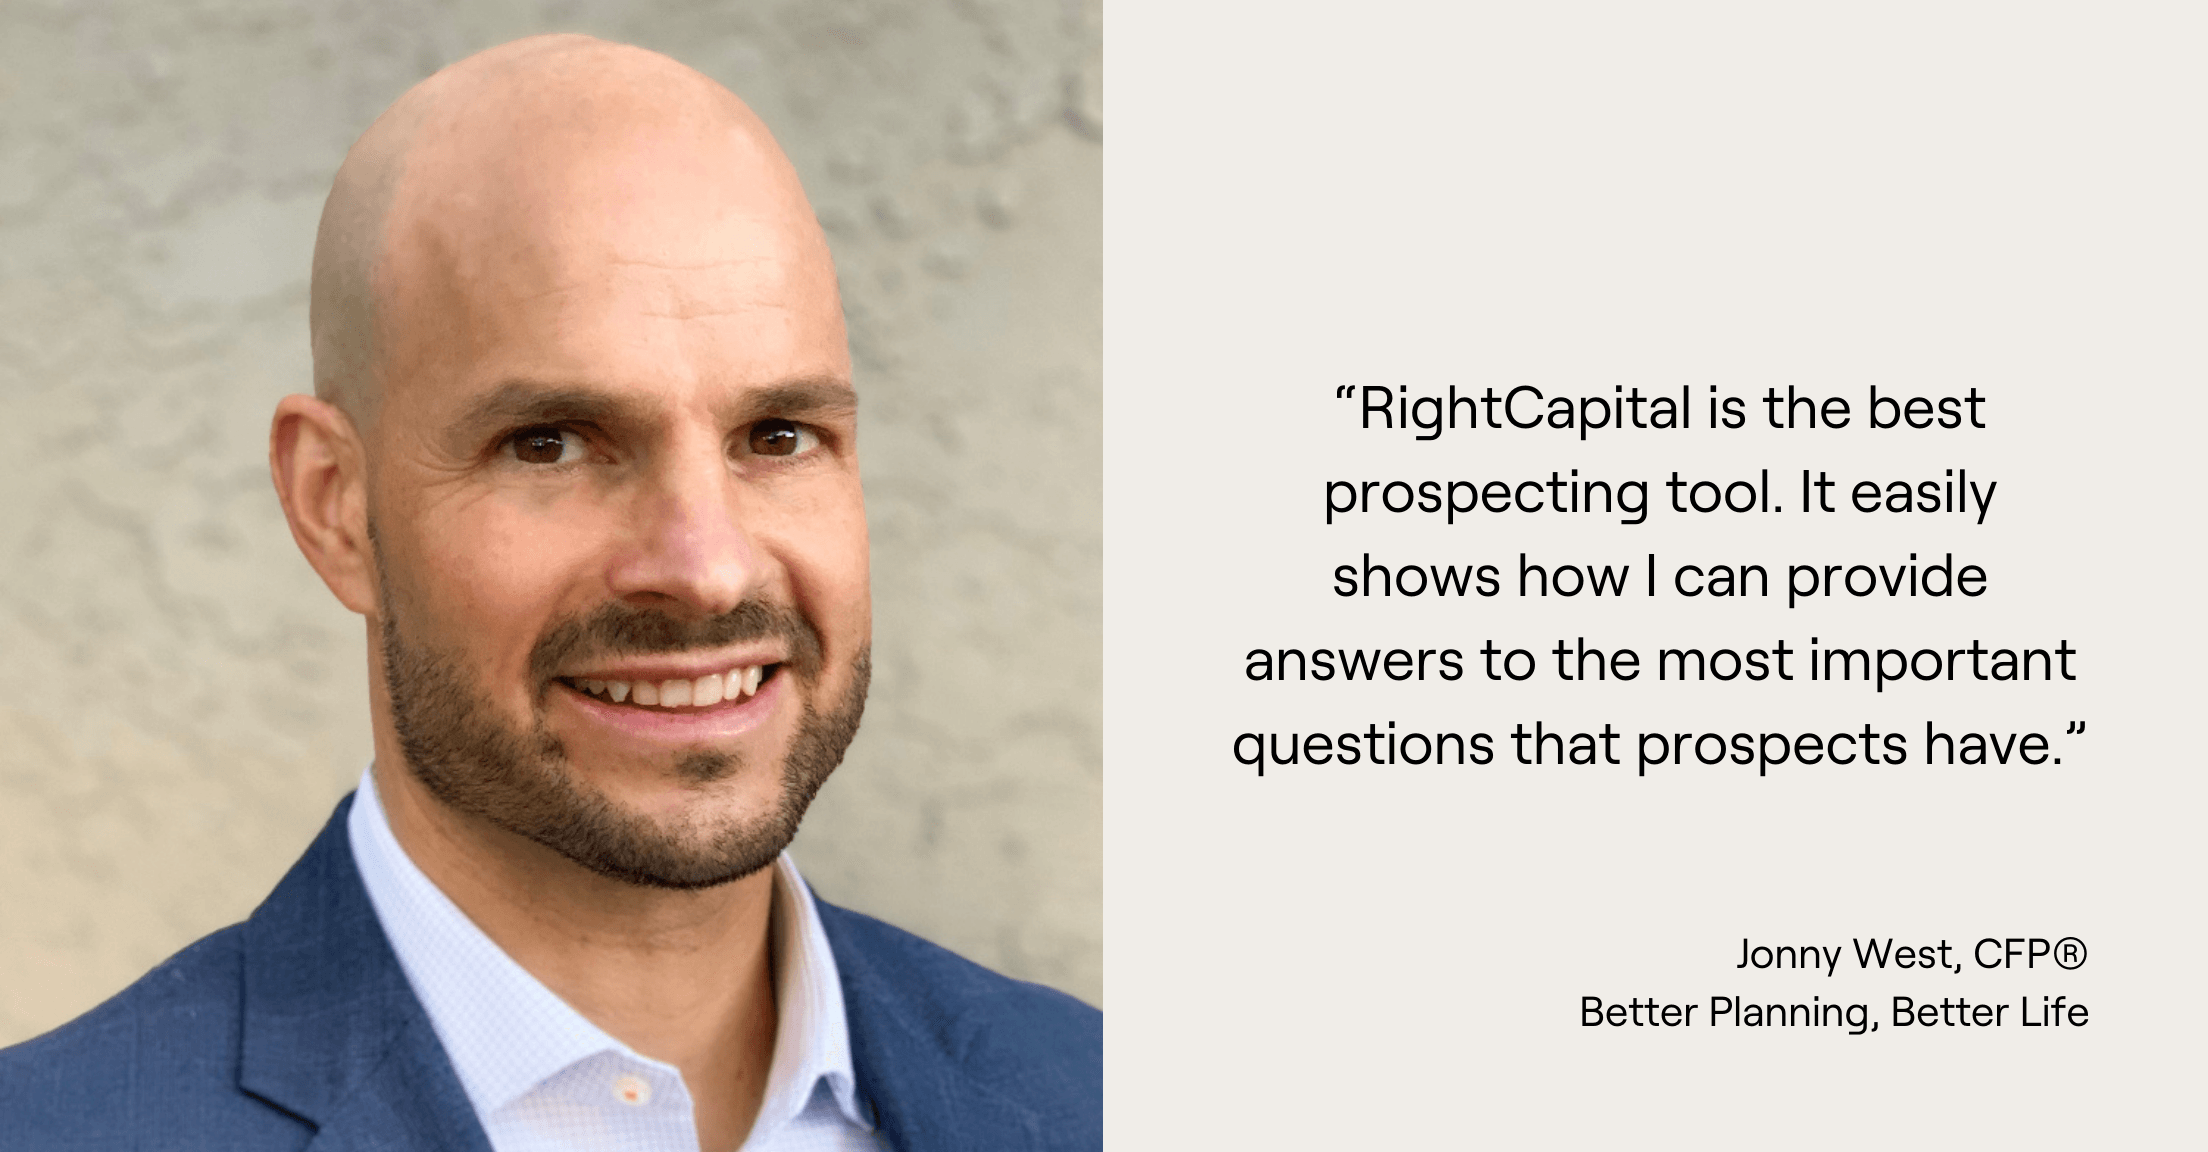 Jonny West headshot and quote, “RightCapital is the best prospecting tool. It easily shows how I can provide answers to the most important questions that prospects have.”